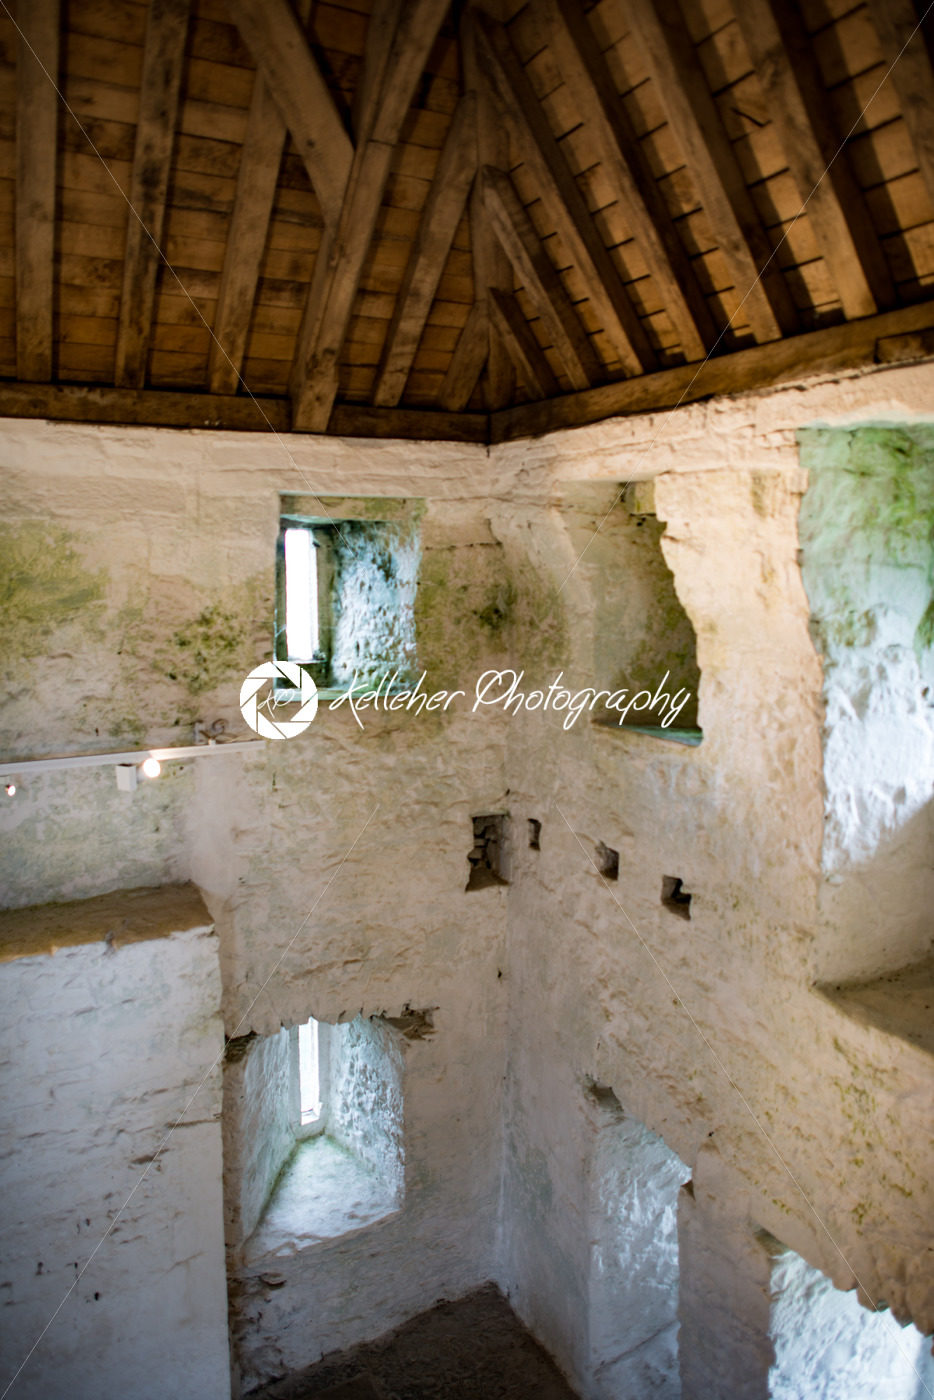 GALWAY, IRELAND – AUGUST 22, 2017: Aughnanure Castle in Ireland near Galway - Kelleher Photography Store